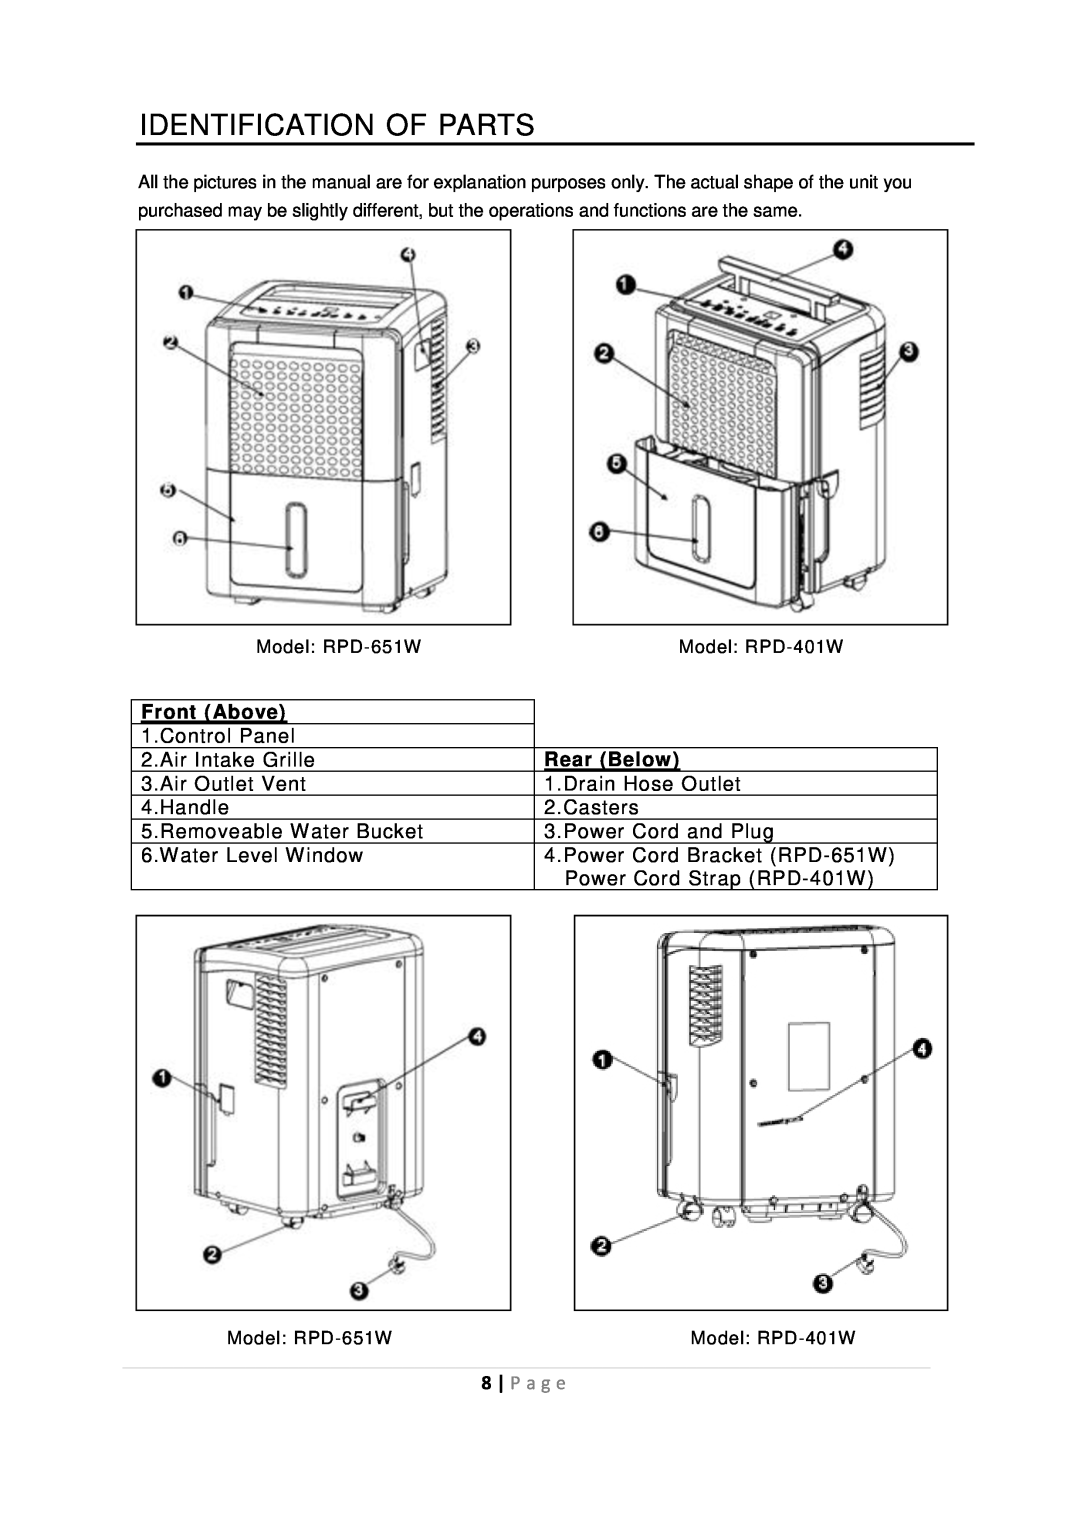 Whynter RPD-410W instruction manual Identification Of Parts, Front Above, Rear Below, P a g e 